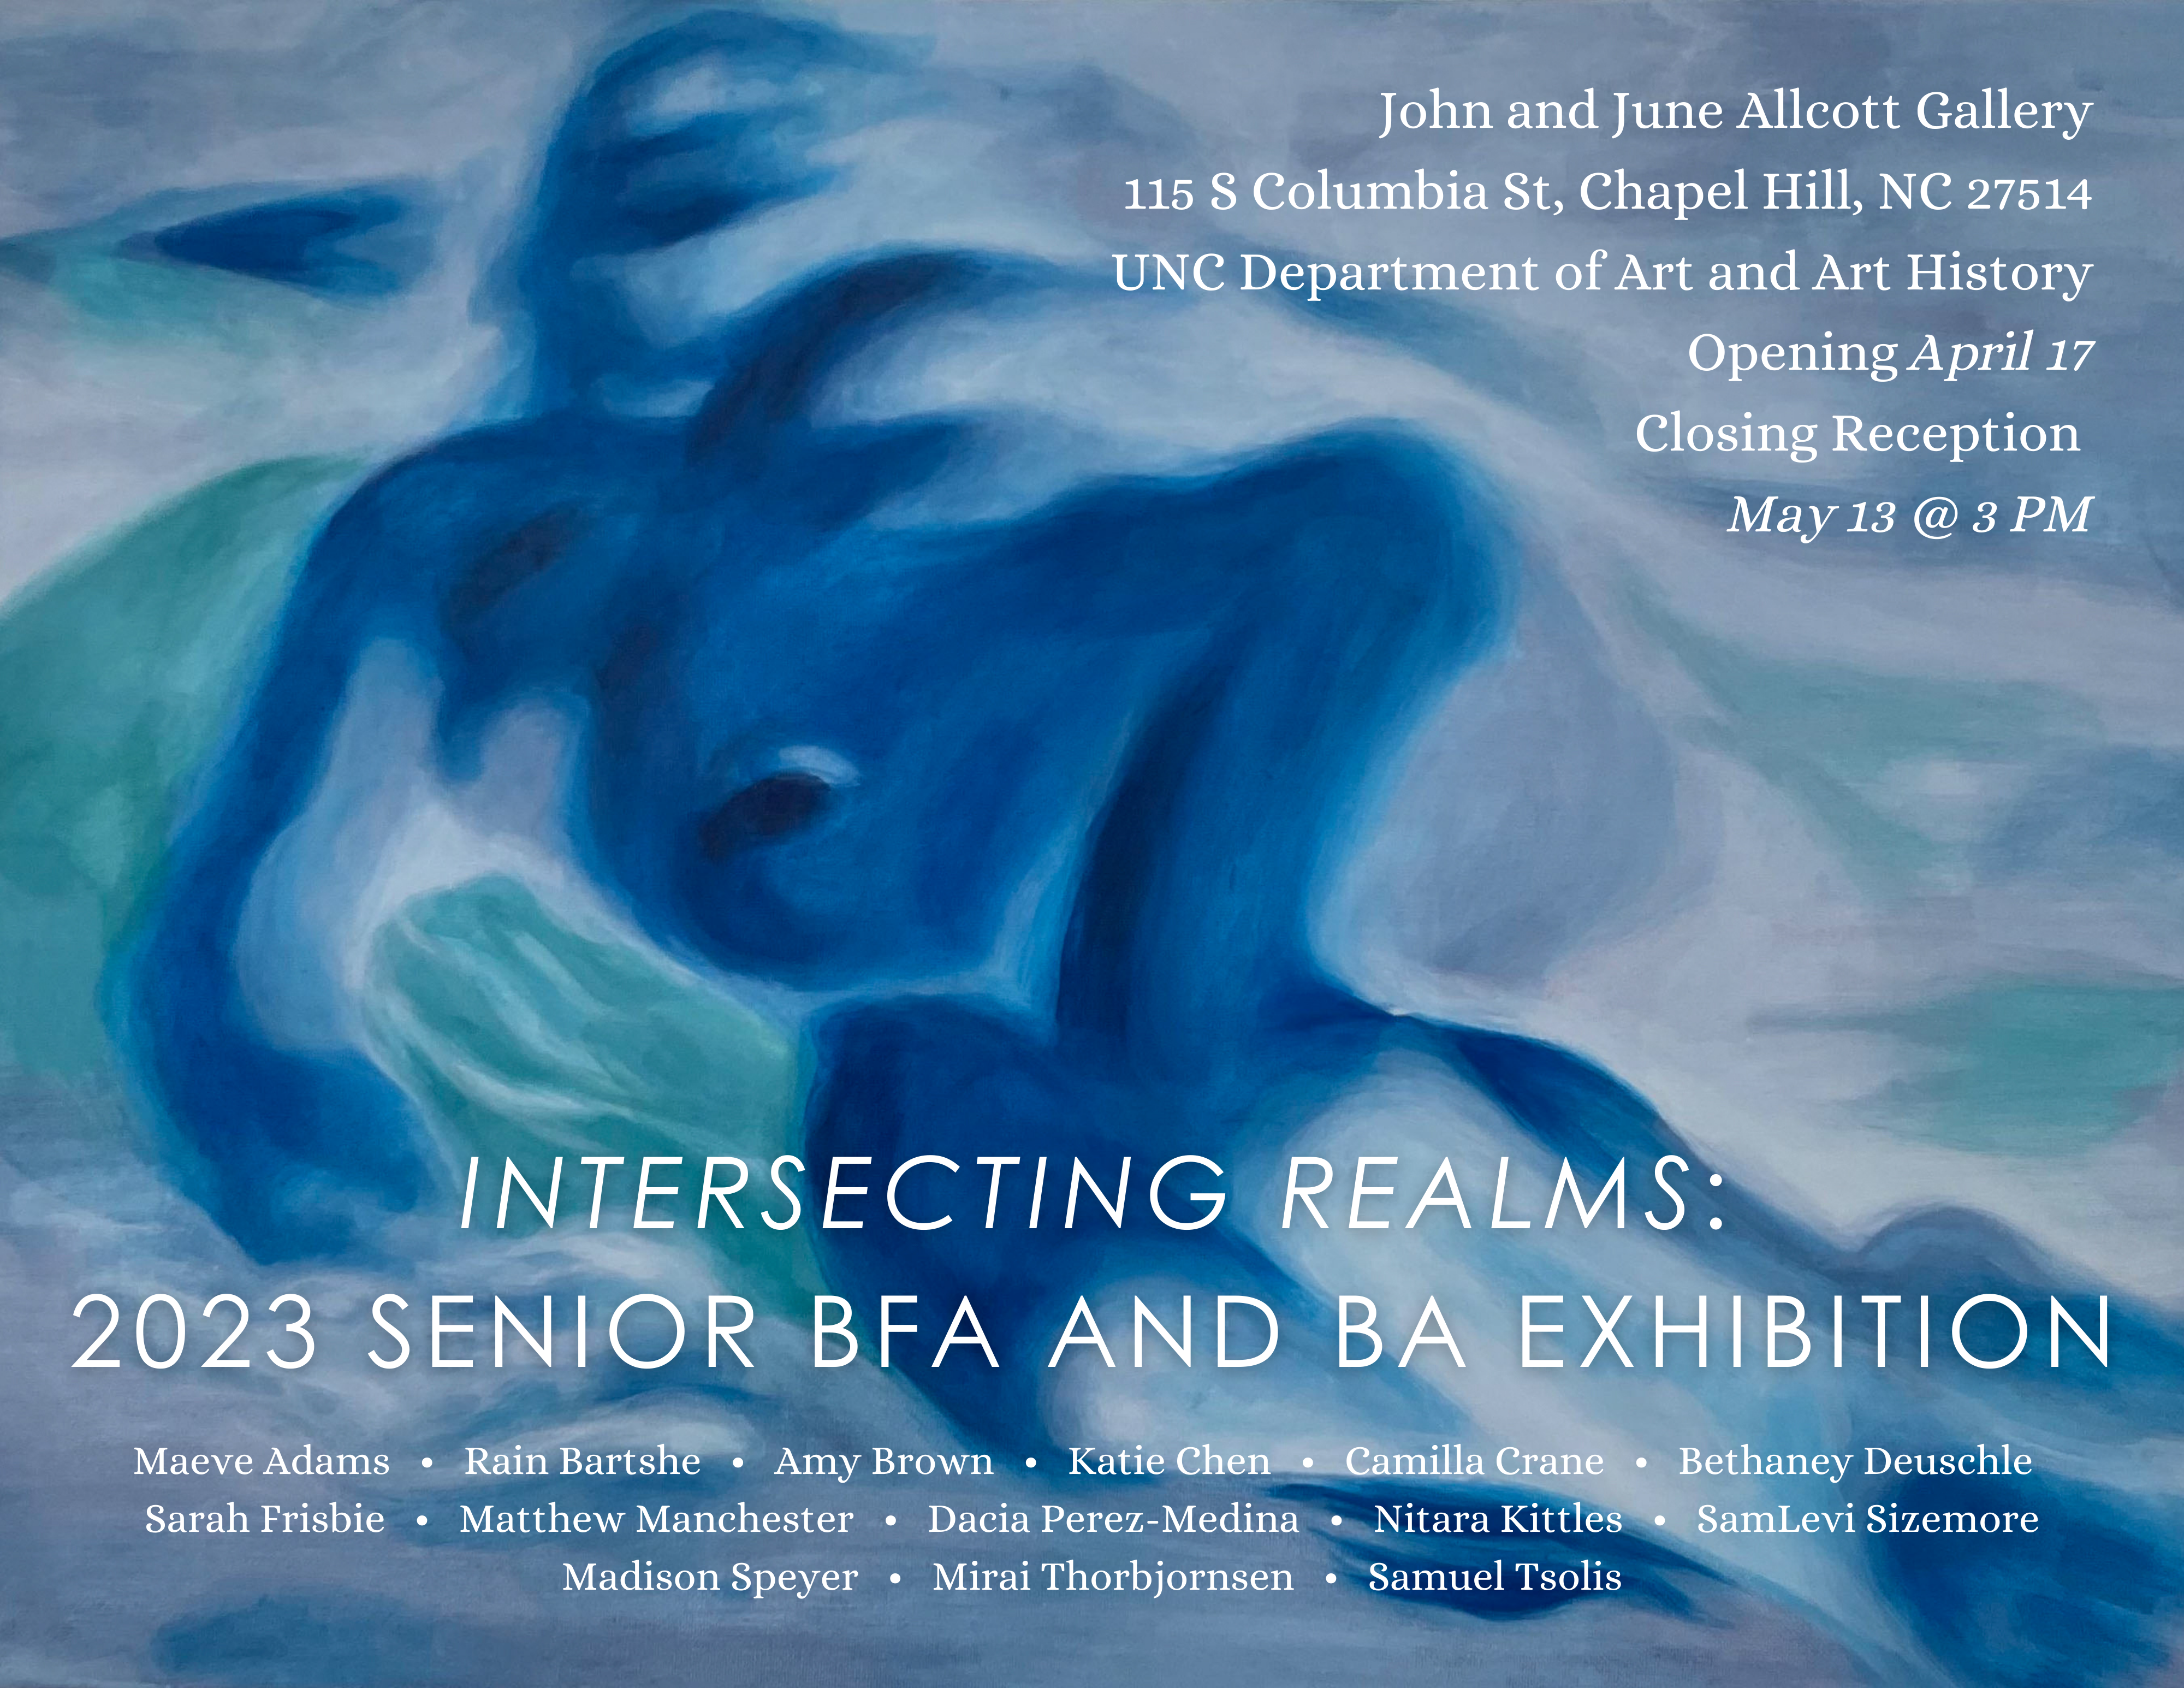 2023 Senior Exhibition: Intersecting Realms, John and June Allcott Gallery, April 17-May 13, 2023